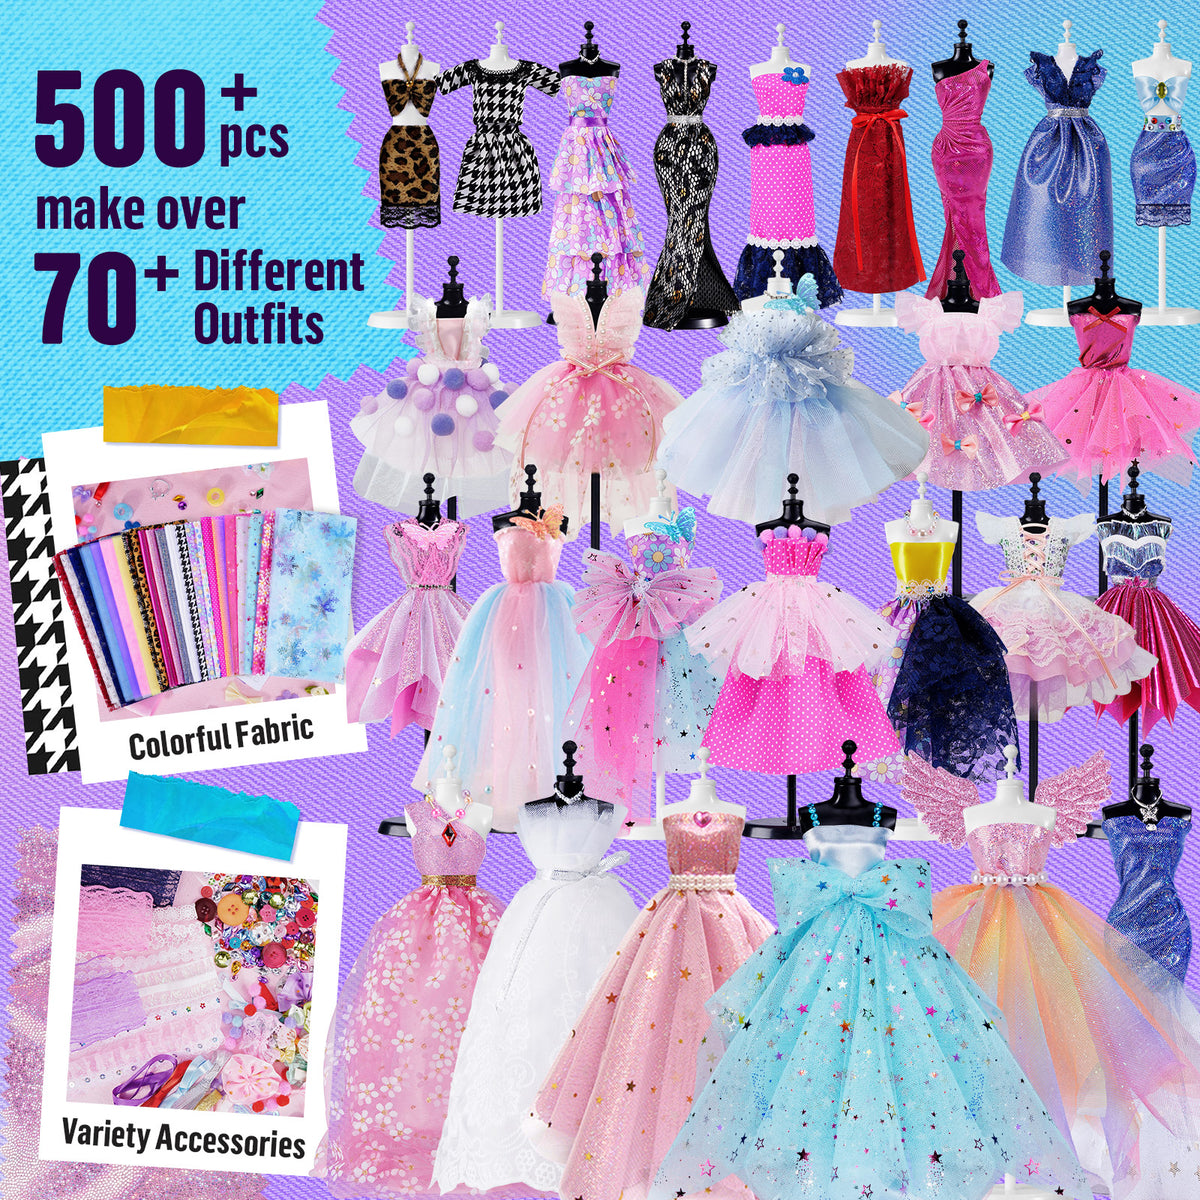 300PC+ Fashion Designer Kits for Girls, Creativity DIY Arts & Crafts Toys Fashion Design Sketchbook with Mannequins, All in One Box Doll Clothes